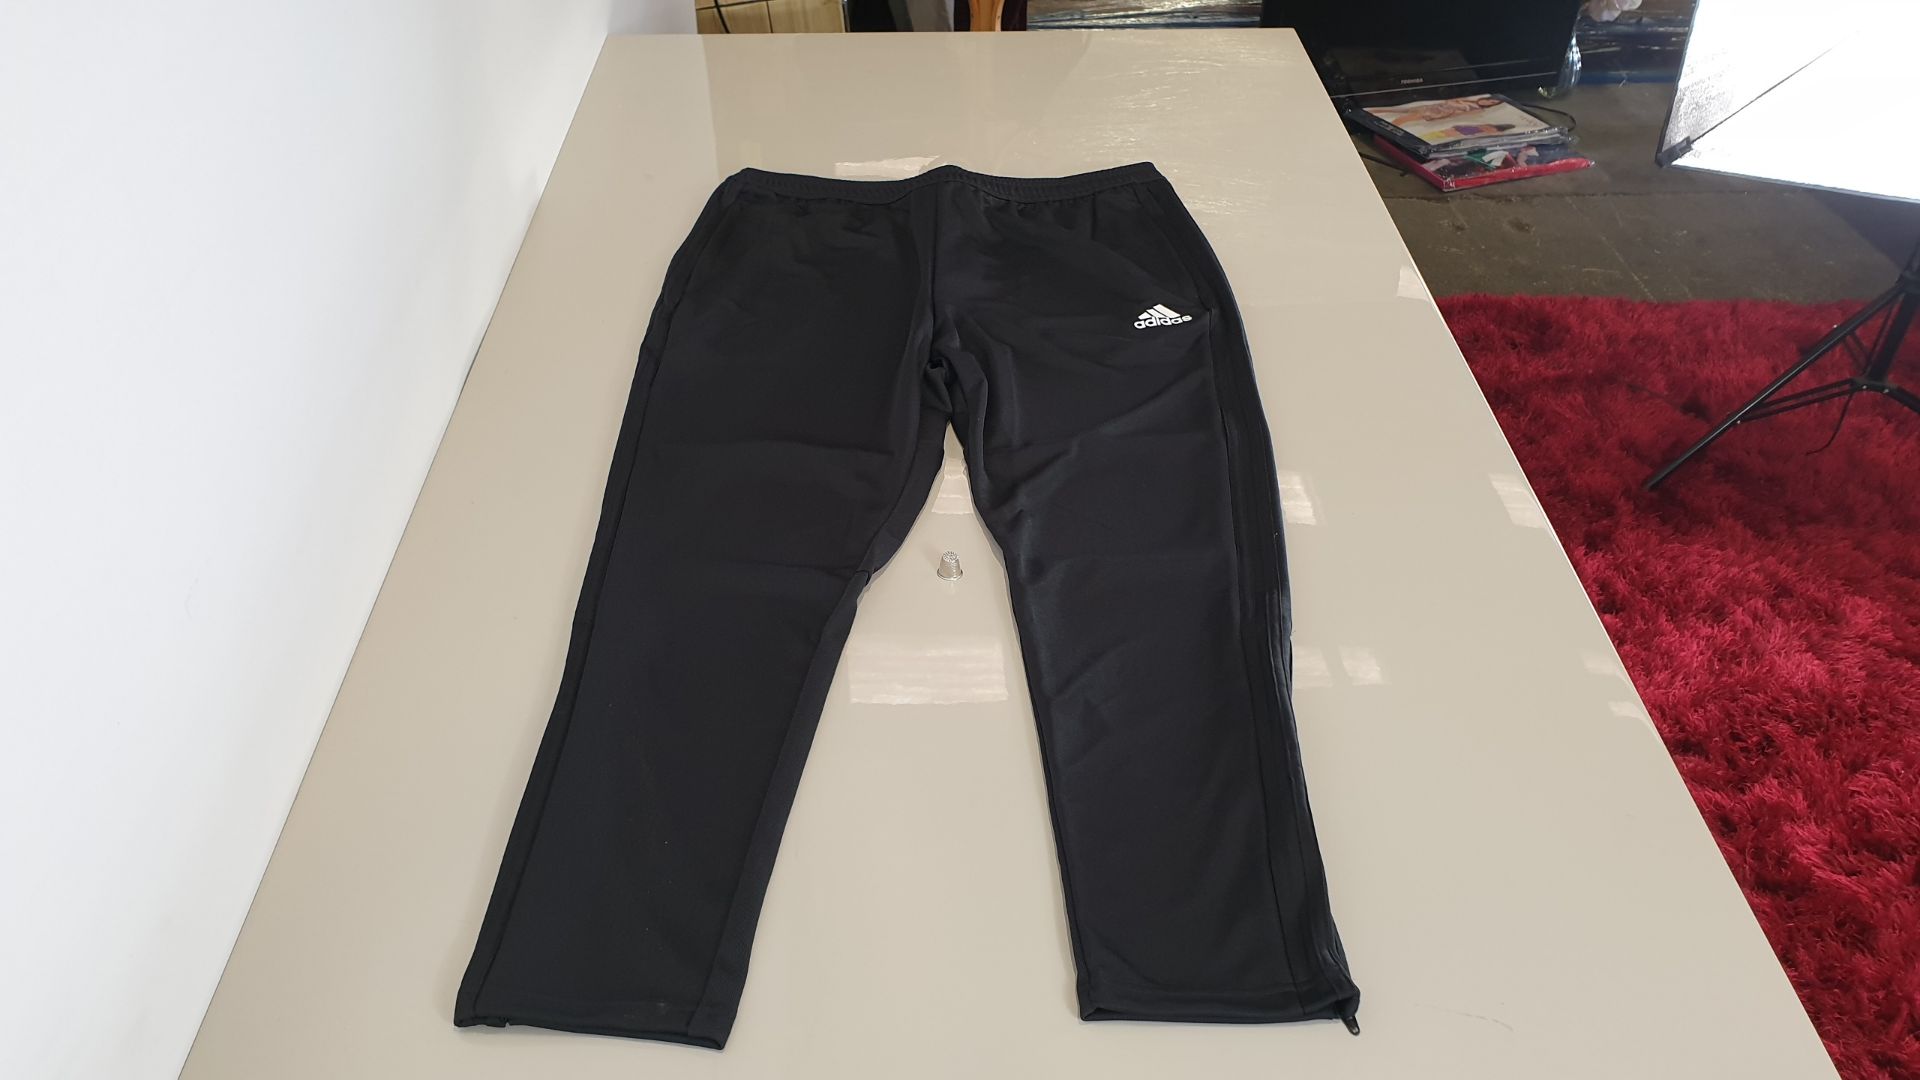 (LOT FOR THURSDAY 28TH MAY AUCTION) 15 X BRAND NEW ADIDAS BLACK / WHITE TRACK / JOGGING PANTS - CODE